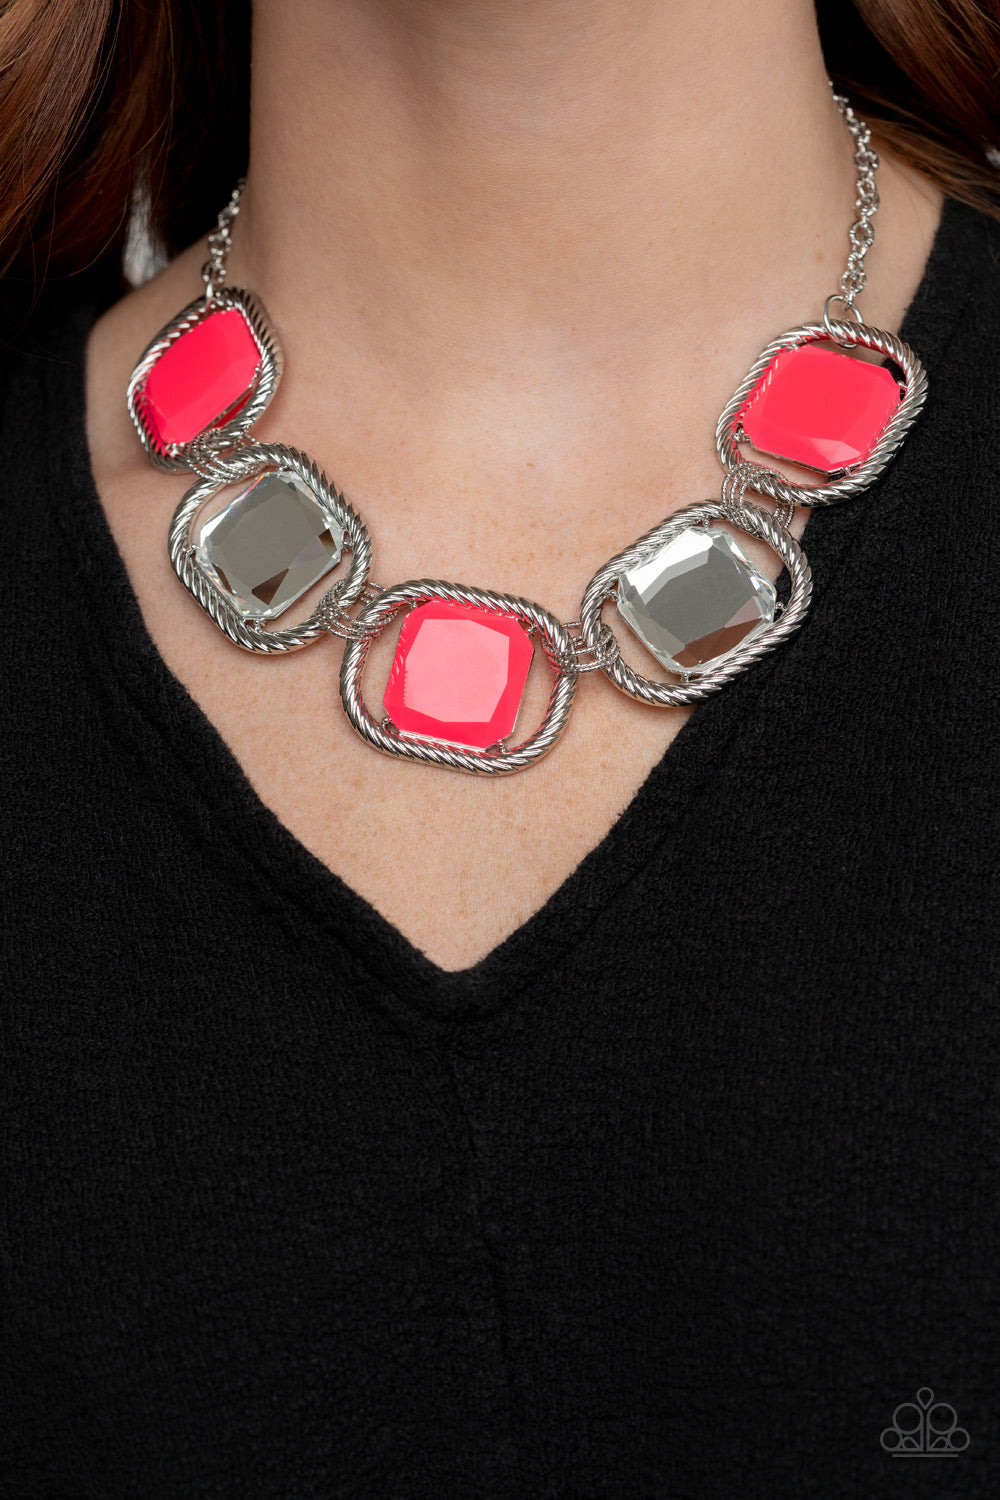 Paparazzi- Pucker Up Pink Necklace